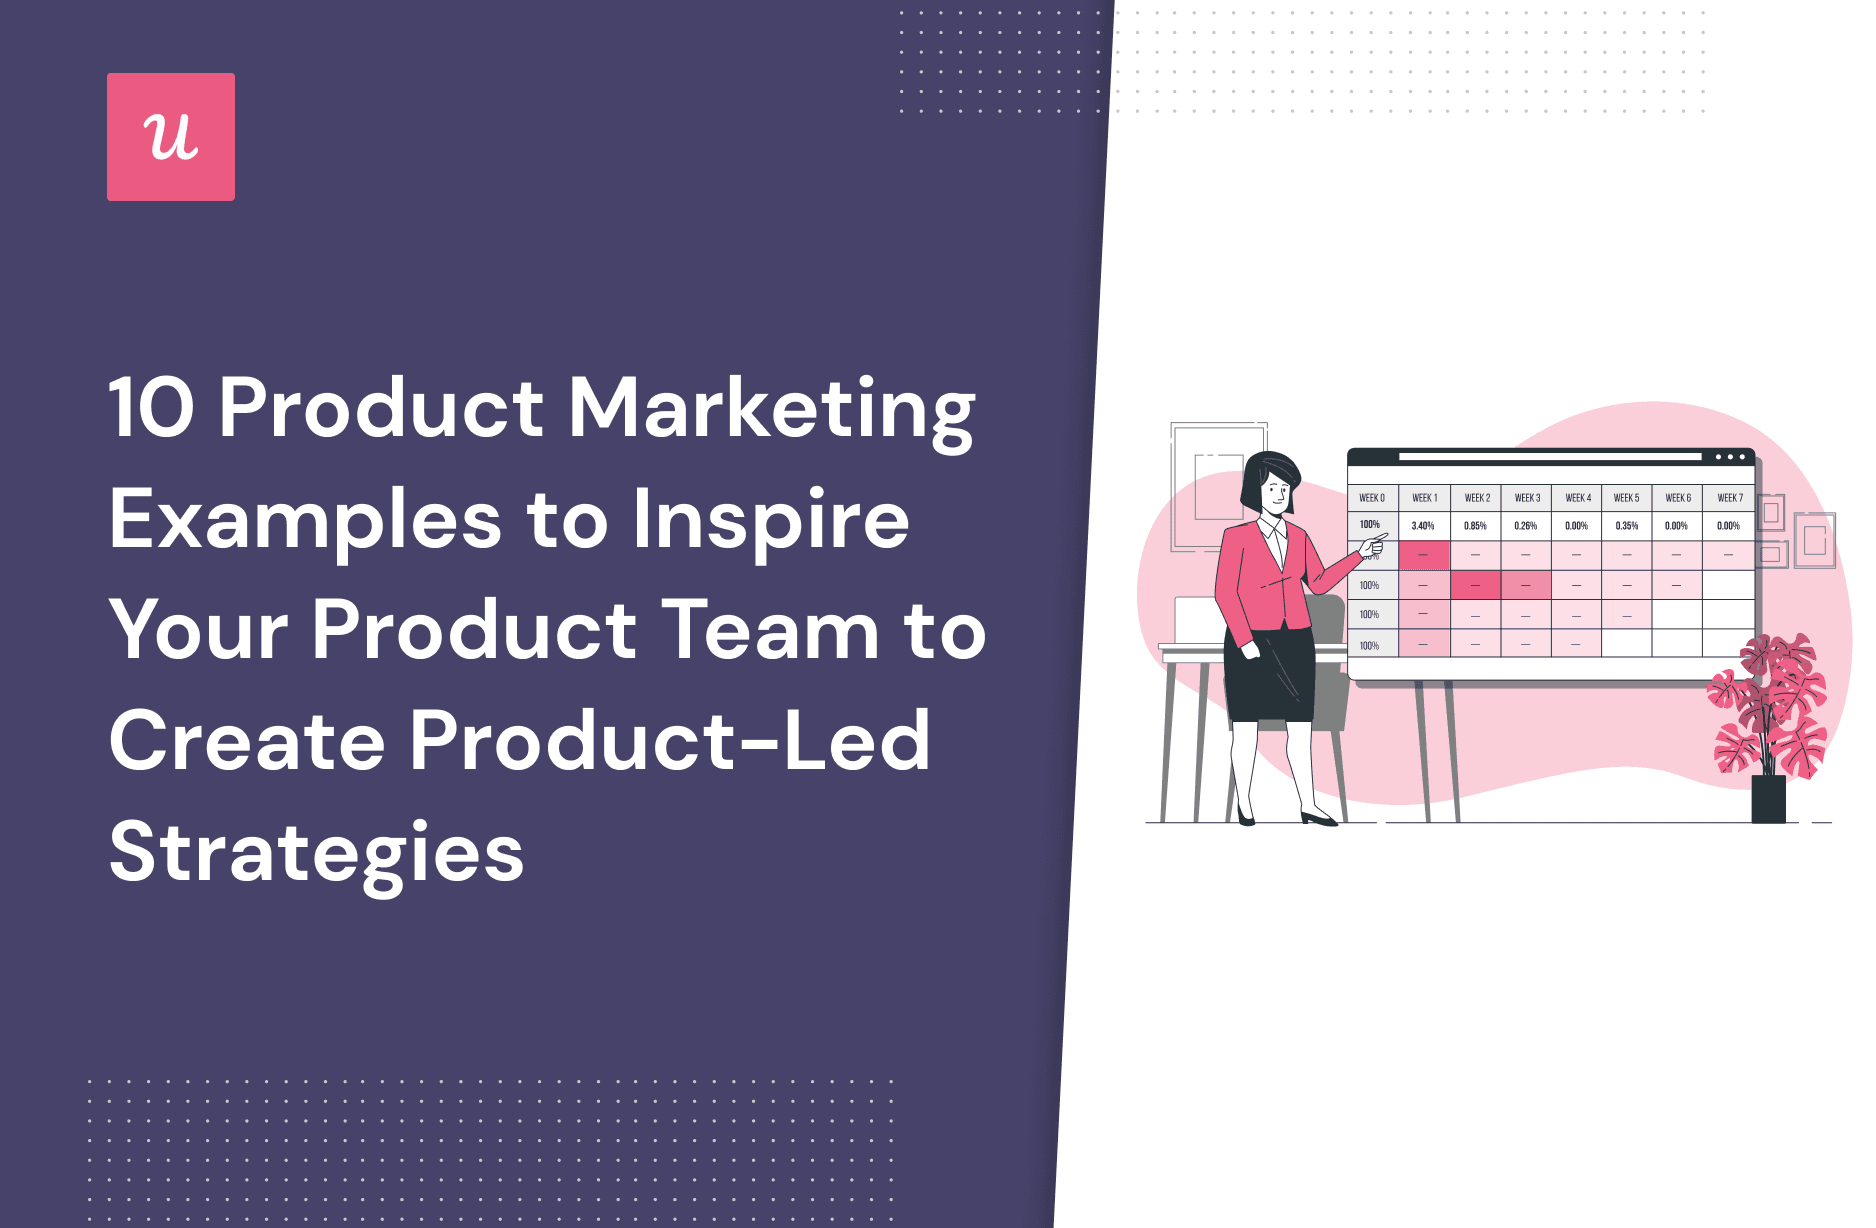 10 Product Marketing Examples To Inspire Your Product Team To Create Product-Led Strategies cover